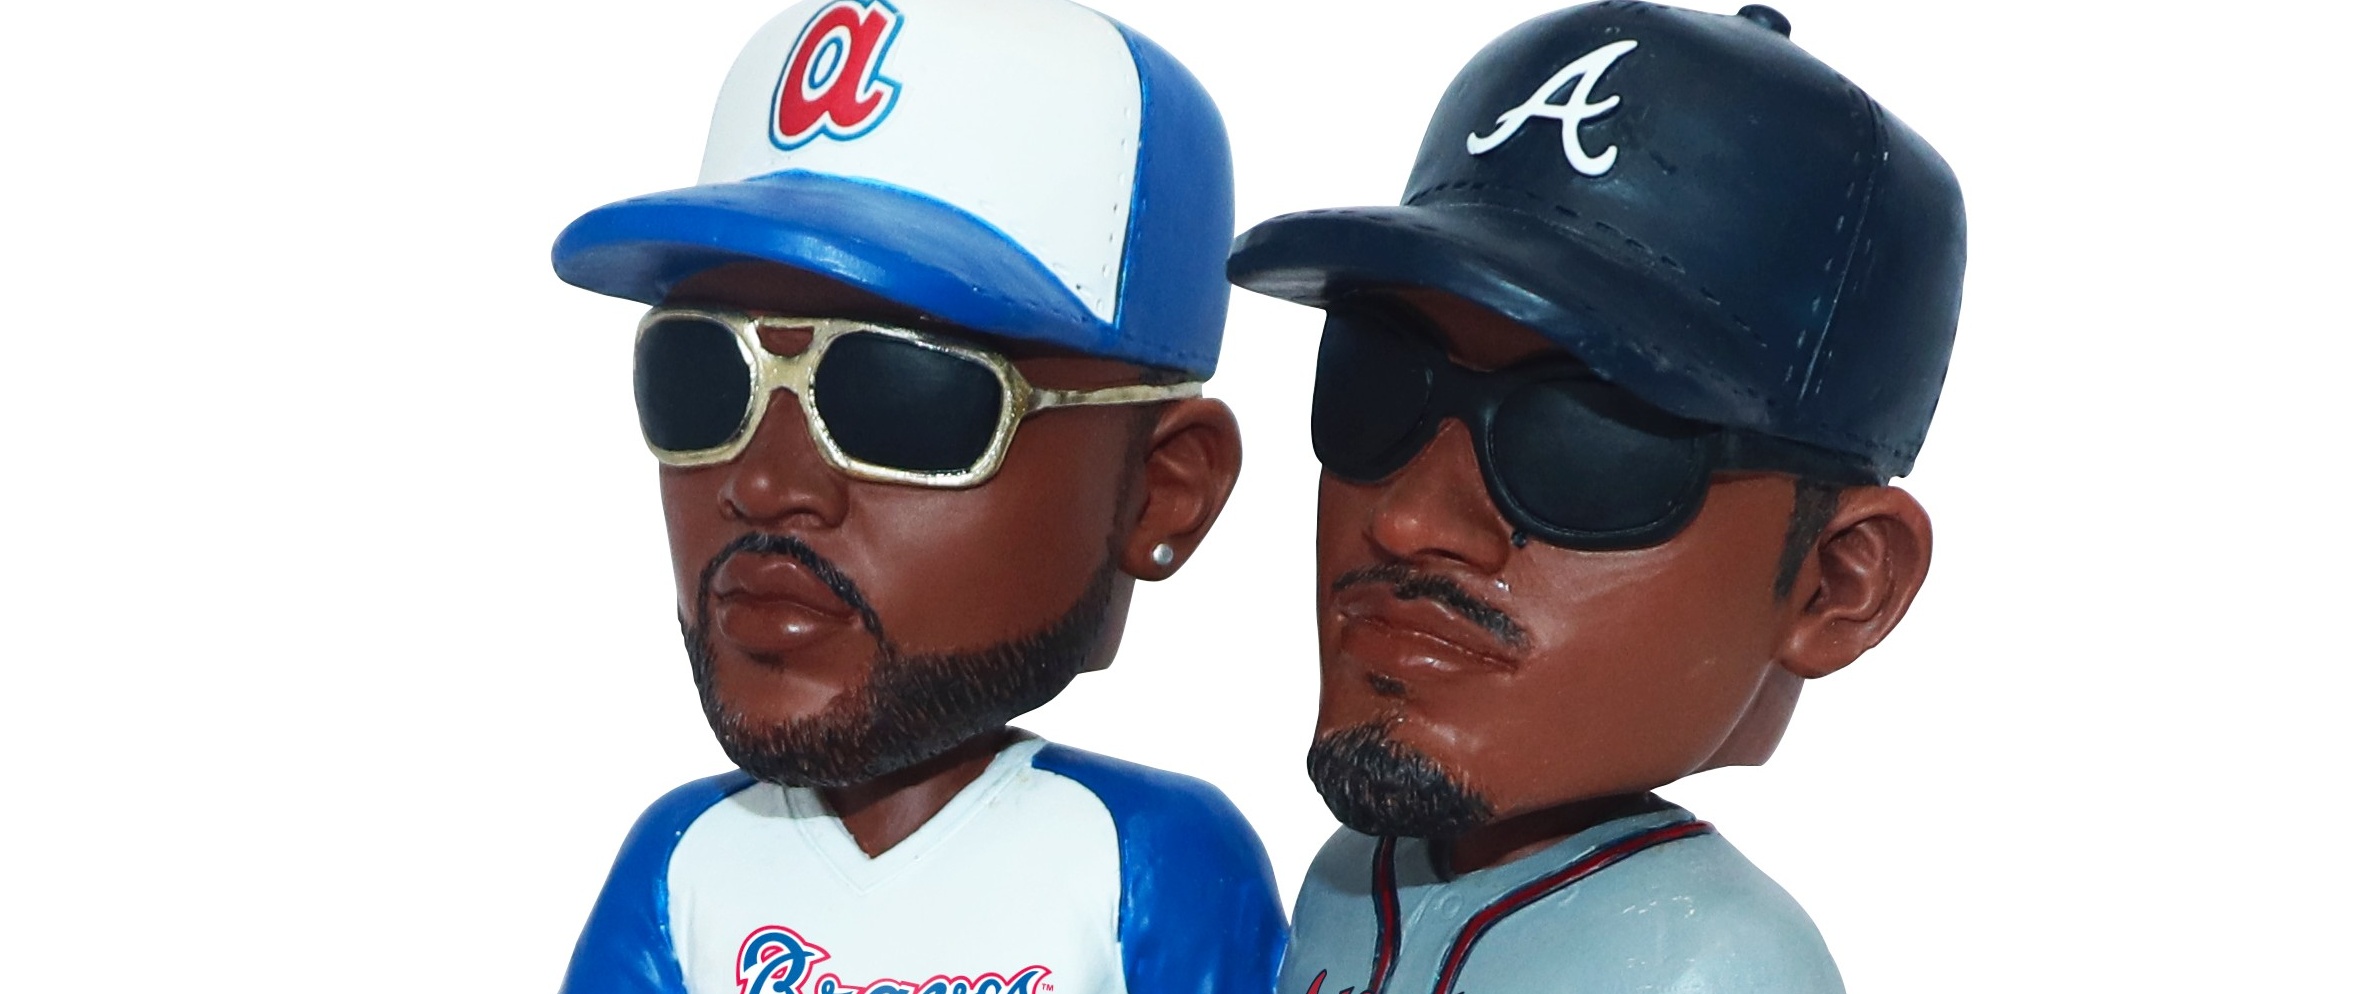 Atlanta Braves To Give Away OutKast Bobbleheads